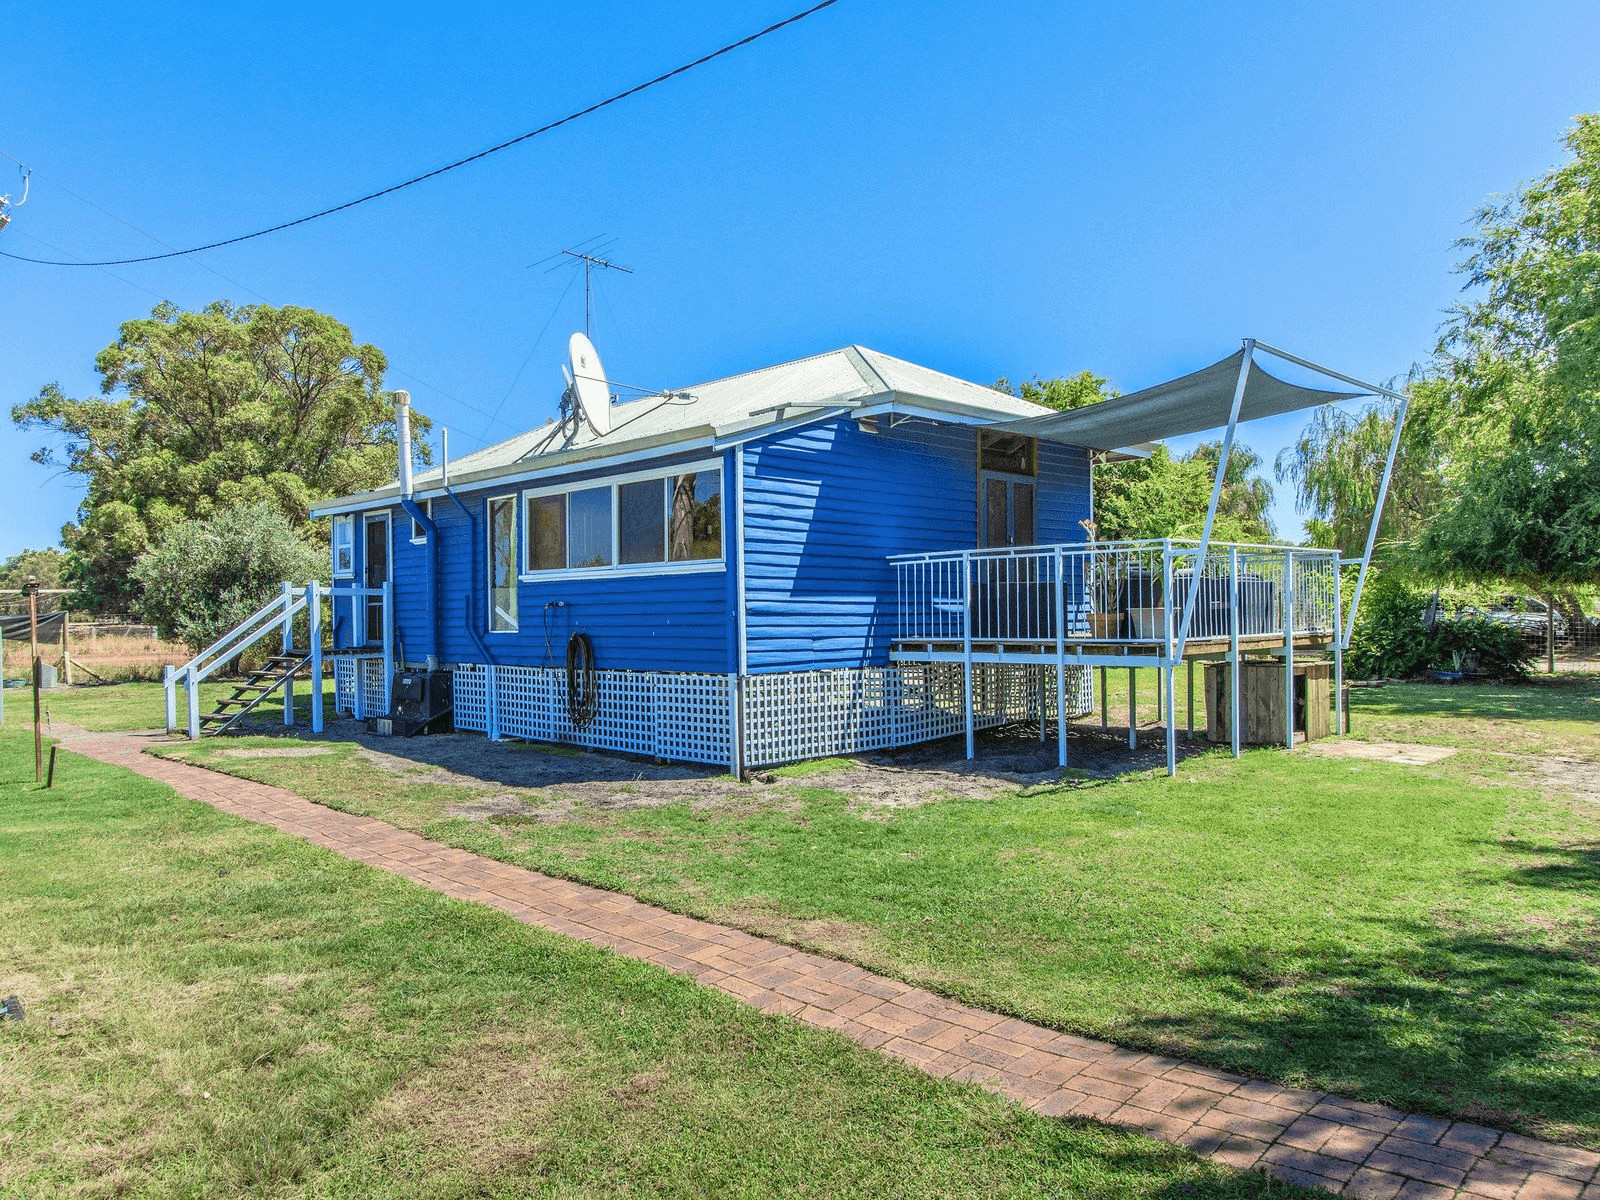 LOT 820/215 Attein Rd, WEST COOLUP, WA 6214